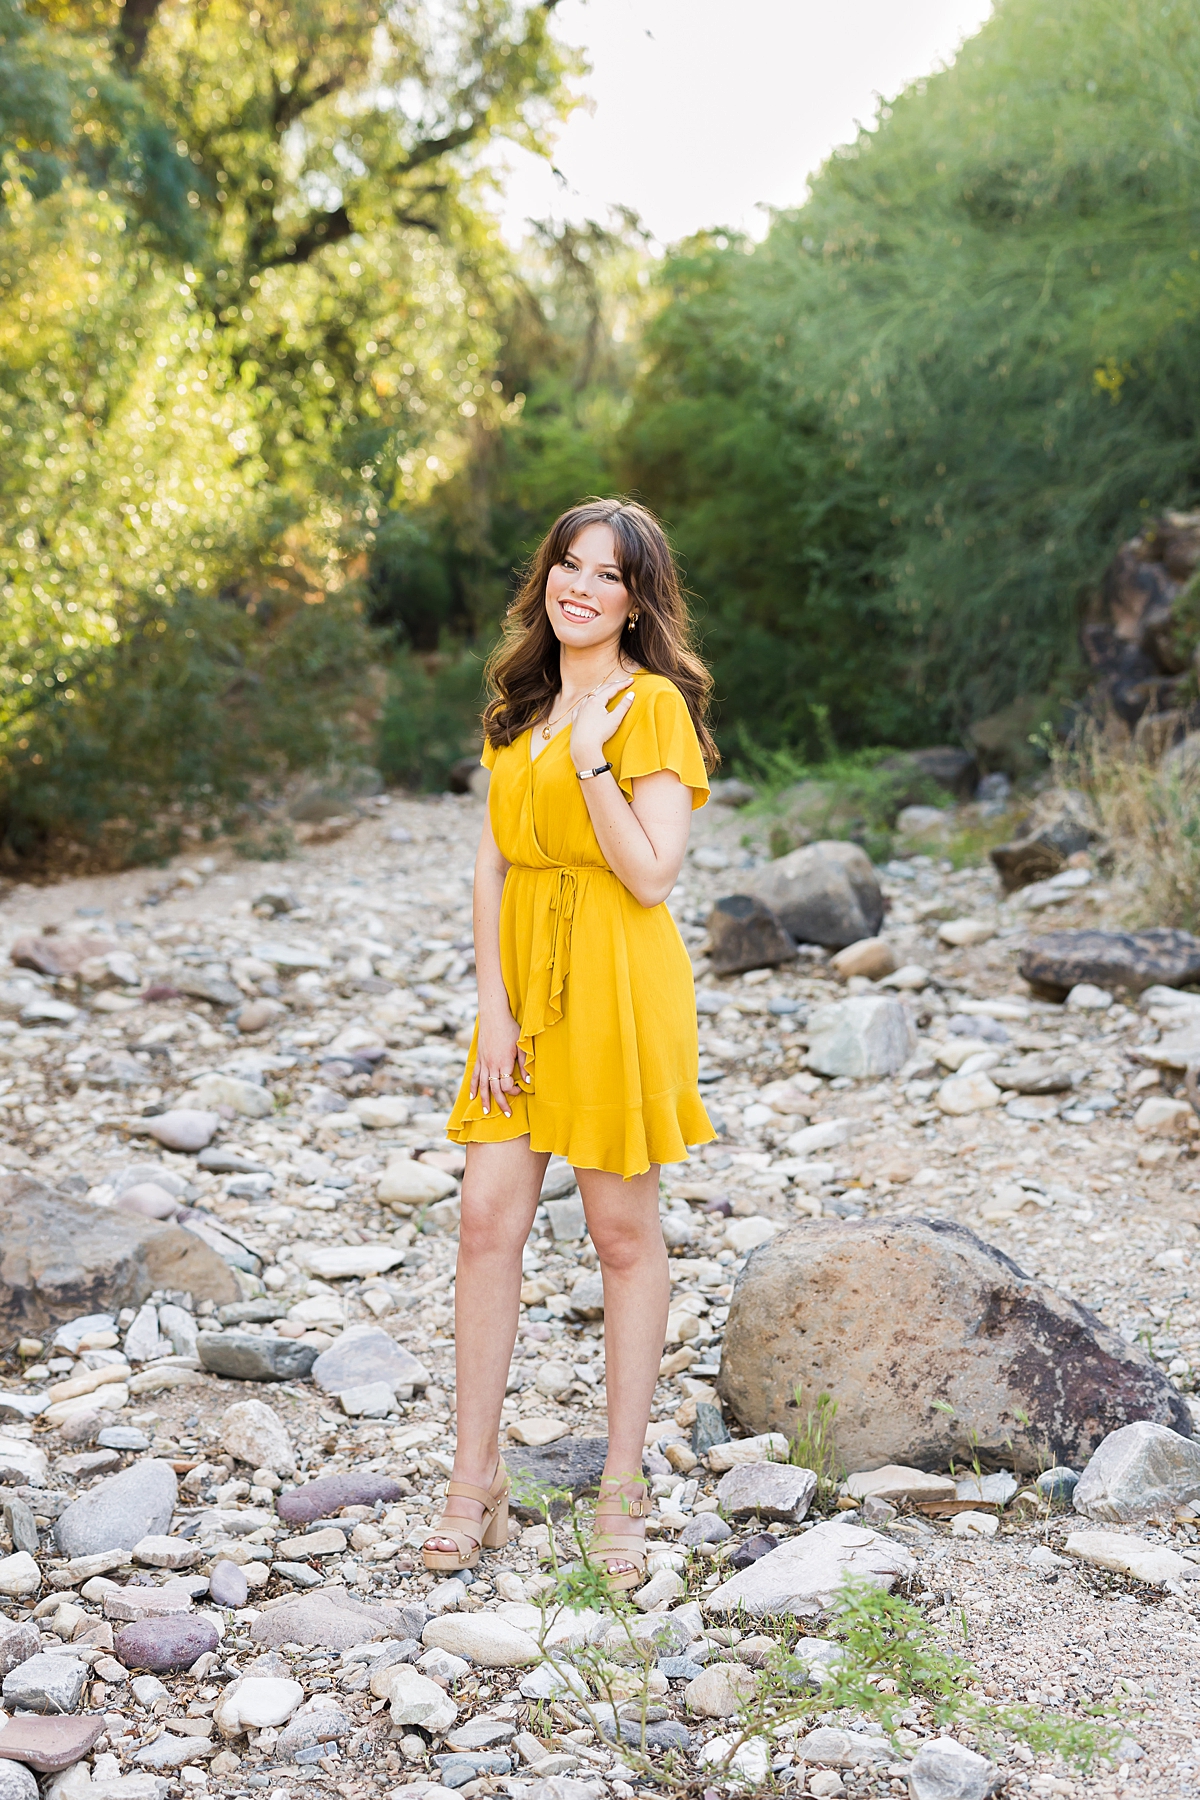 Leah Hope Photography | Scottsdale Arizona Senior Photographer | Phoenix Arizona High School Senior Pictures | Natural Light Photography | What to Wear | Senior Girl Poses and Posing Ideas | Senior Photo Shoot Outfit Inspiration | Outfits and Styling Fashion Ideas for Senior Girls | Graduation Pictures | Spring Senior Pictures | Nature Wash and Flowers